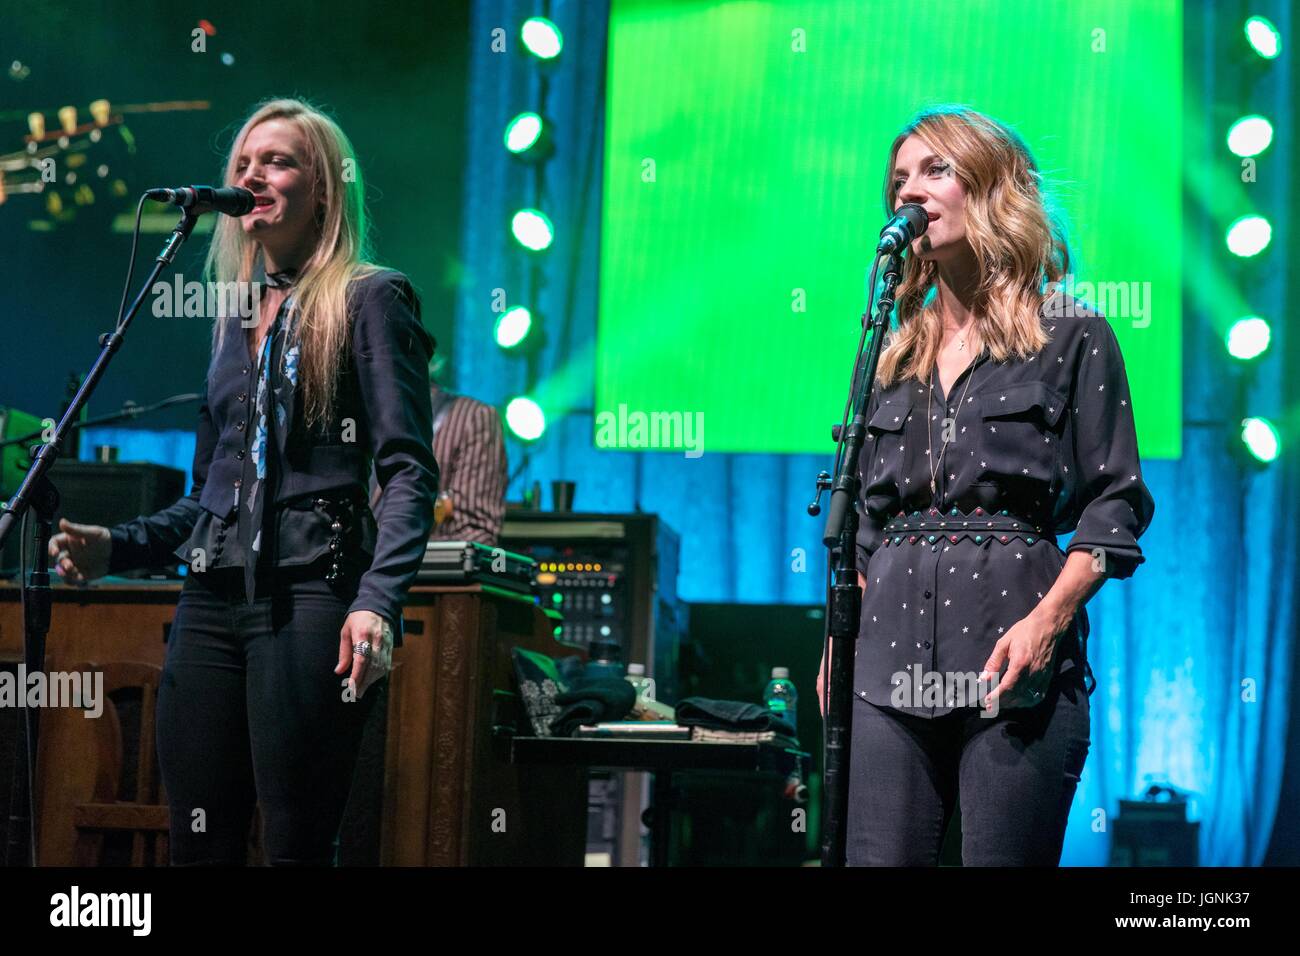 Milwaukee, Wisconsin, USA. 6th July, 2017. CHARLEY WEBB and HATTIE WEBB of Tom Petty and the Heartbreakers performs live at Henry Maier Festival Park during Summerfest in Milwaukee, Wisconsin Credit: Daniel DeSlover/ZUMA Wire/Alamy Live News Stock Photo